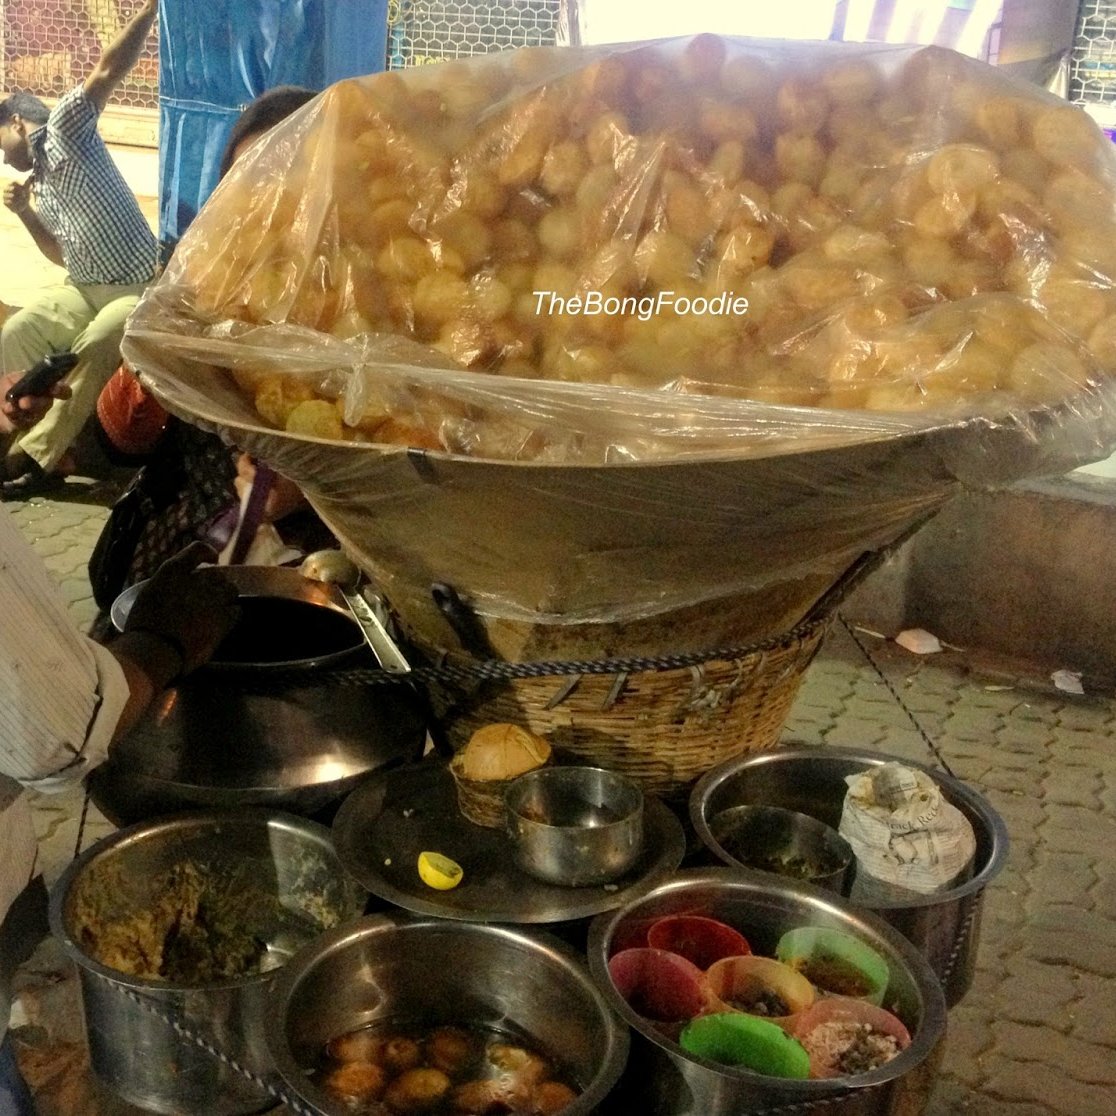 And then finally comes on of the most famous street foods of Kolkata - phuchka(panipuri)!!!!